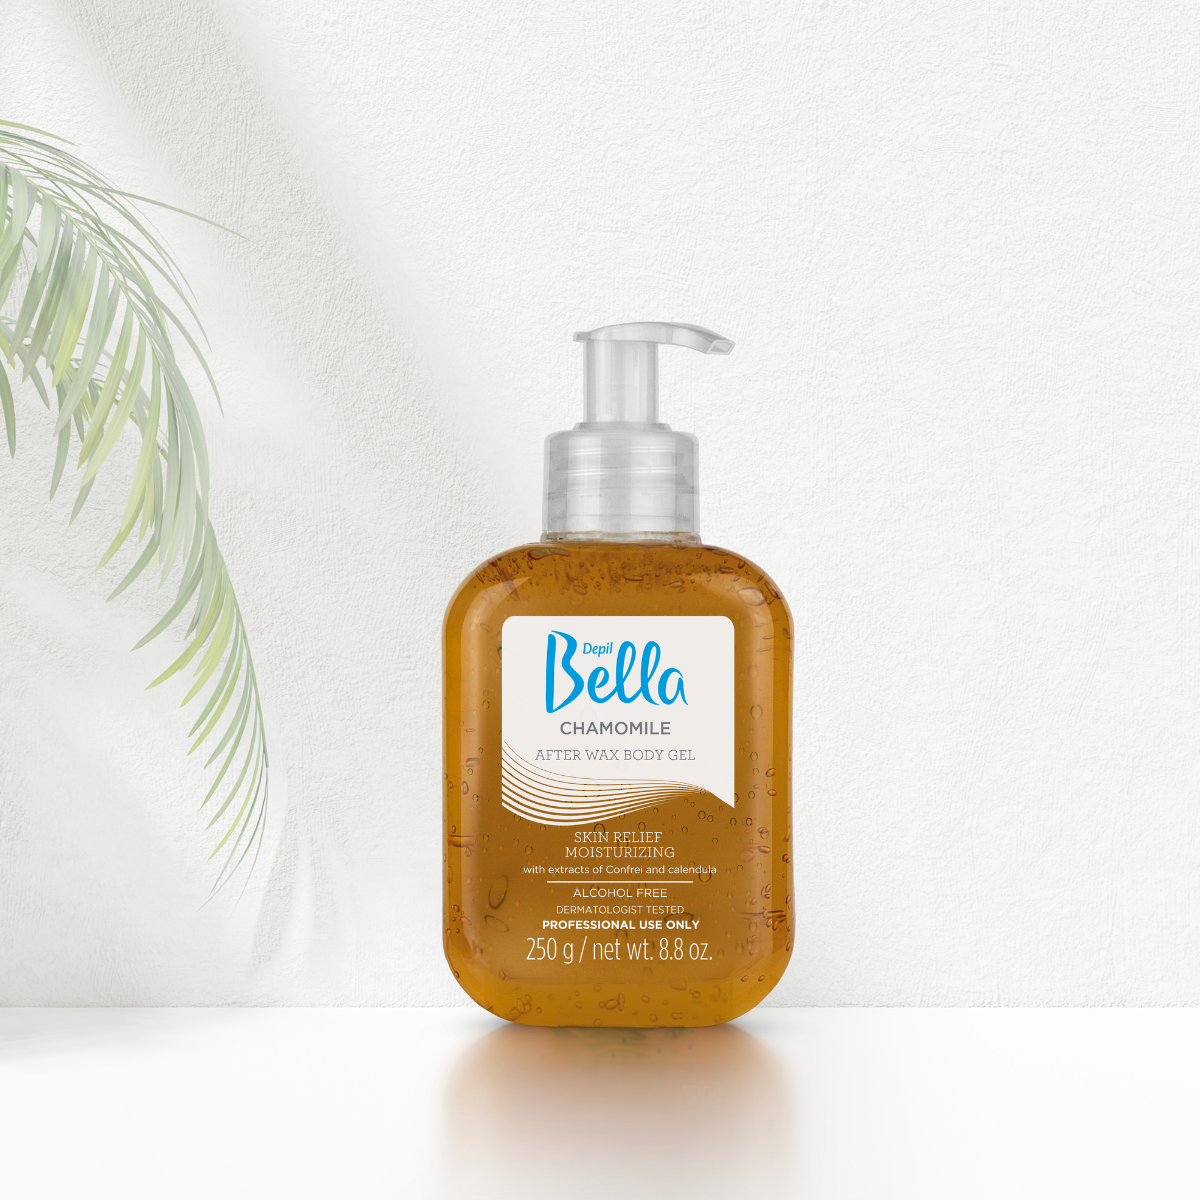 Depil Bella Chamomile Post-Waxing Body Gel 250g - Buy professional cosmetics dedicated to hair removal